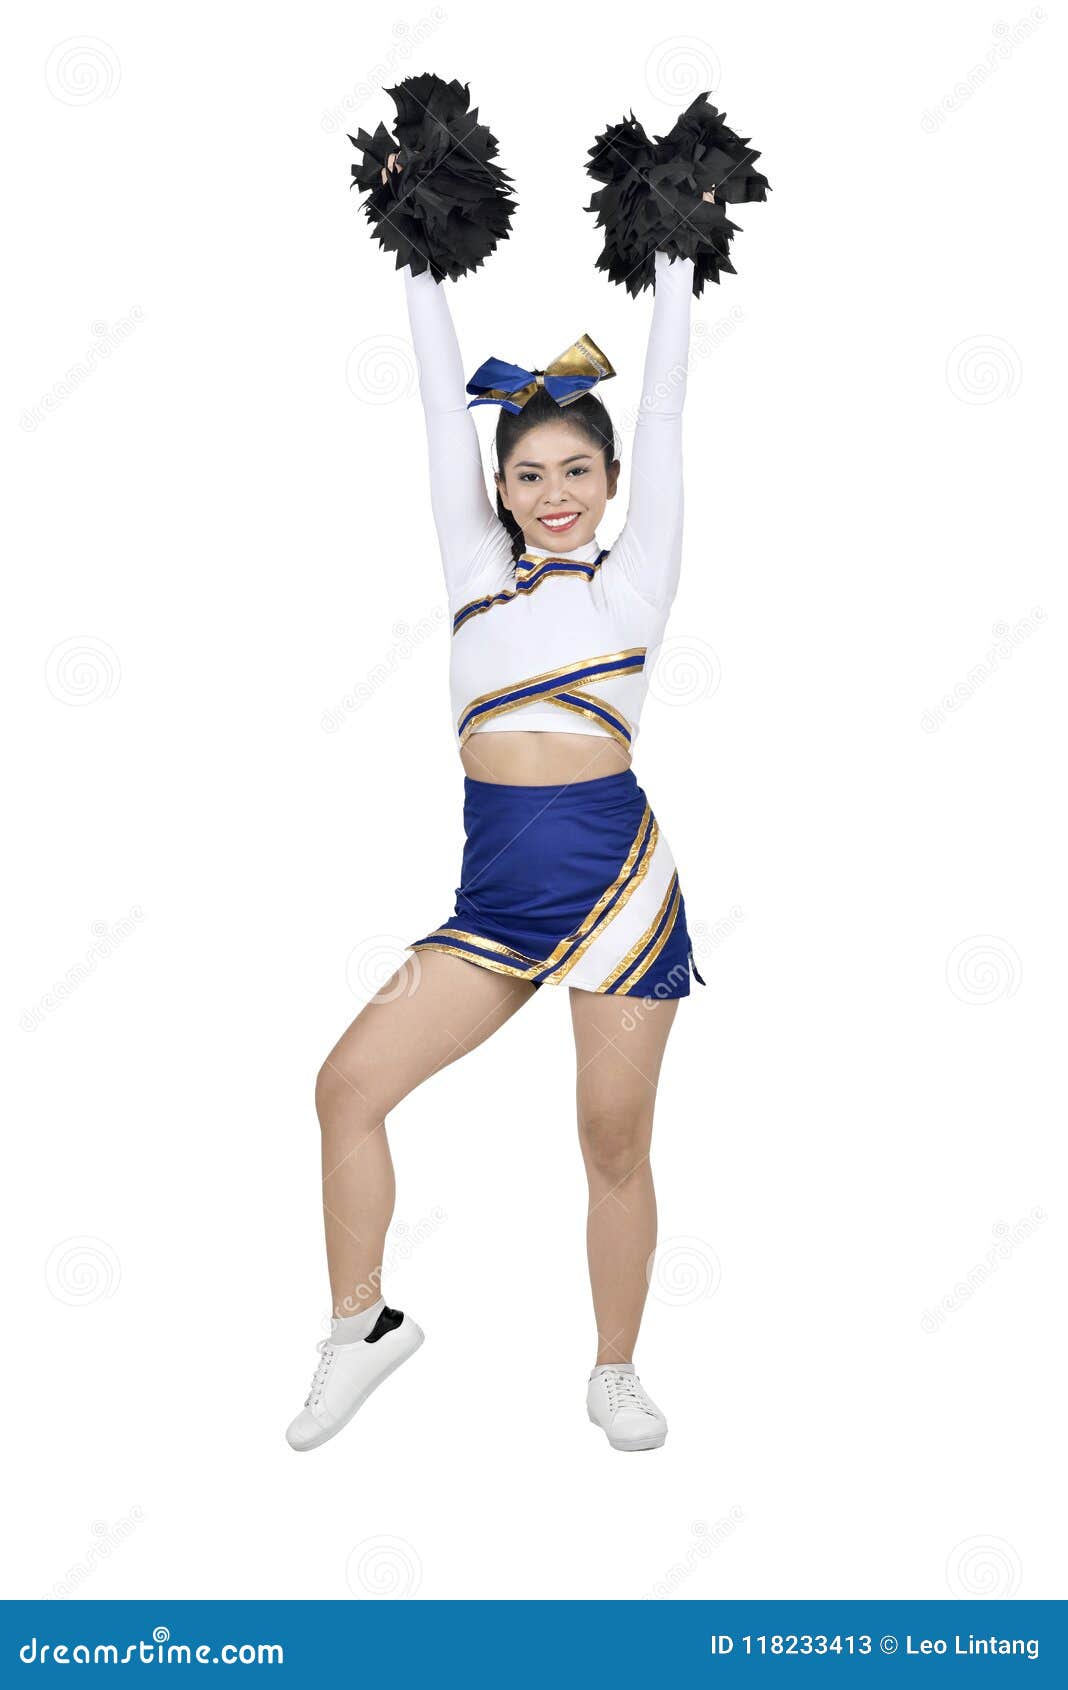 Cheerleader with Pom Poms Up Stock Photo - Image of female, cute: 14143554